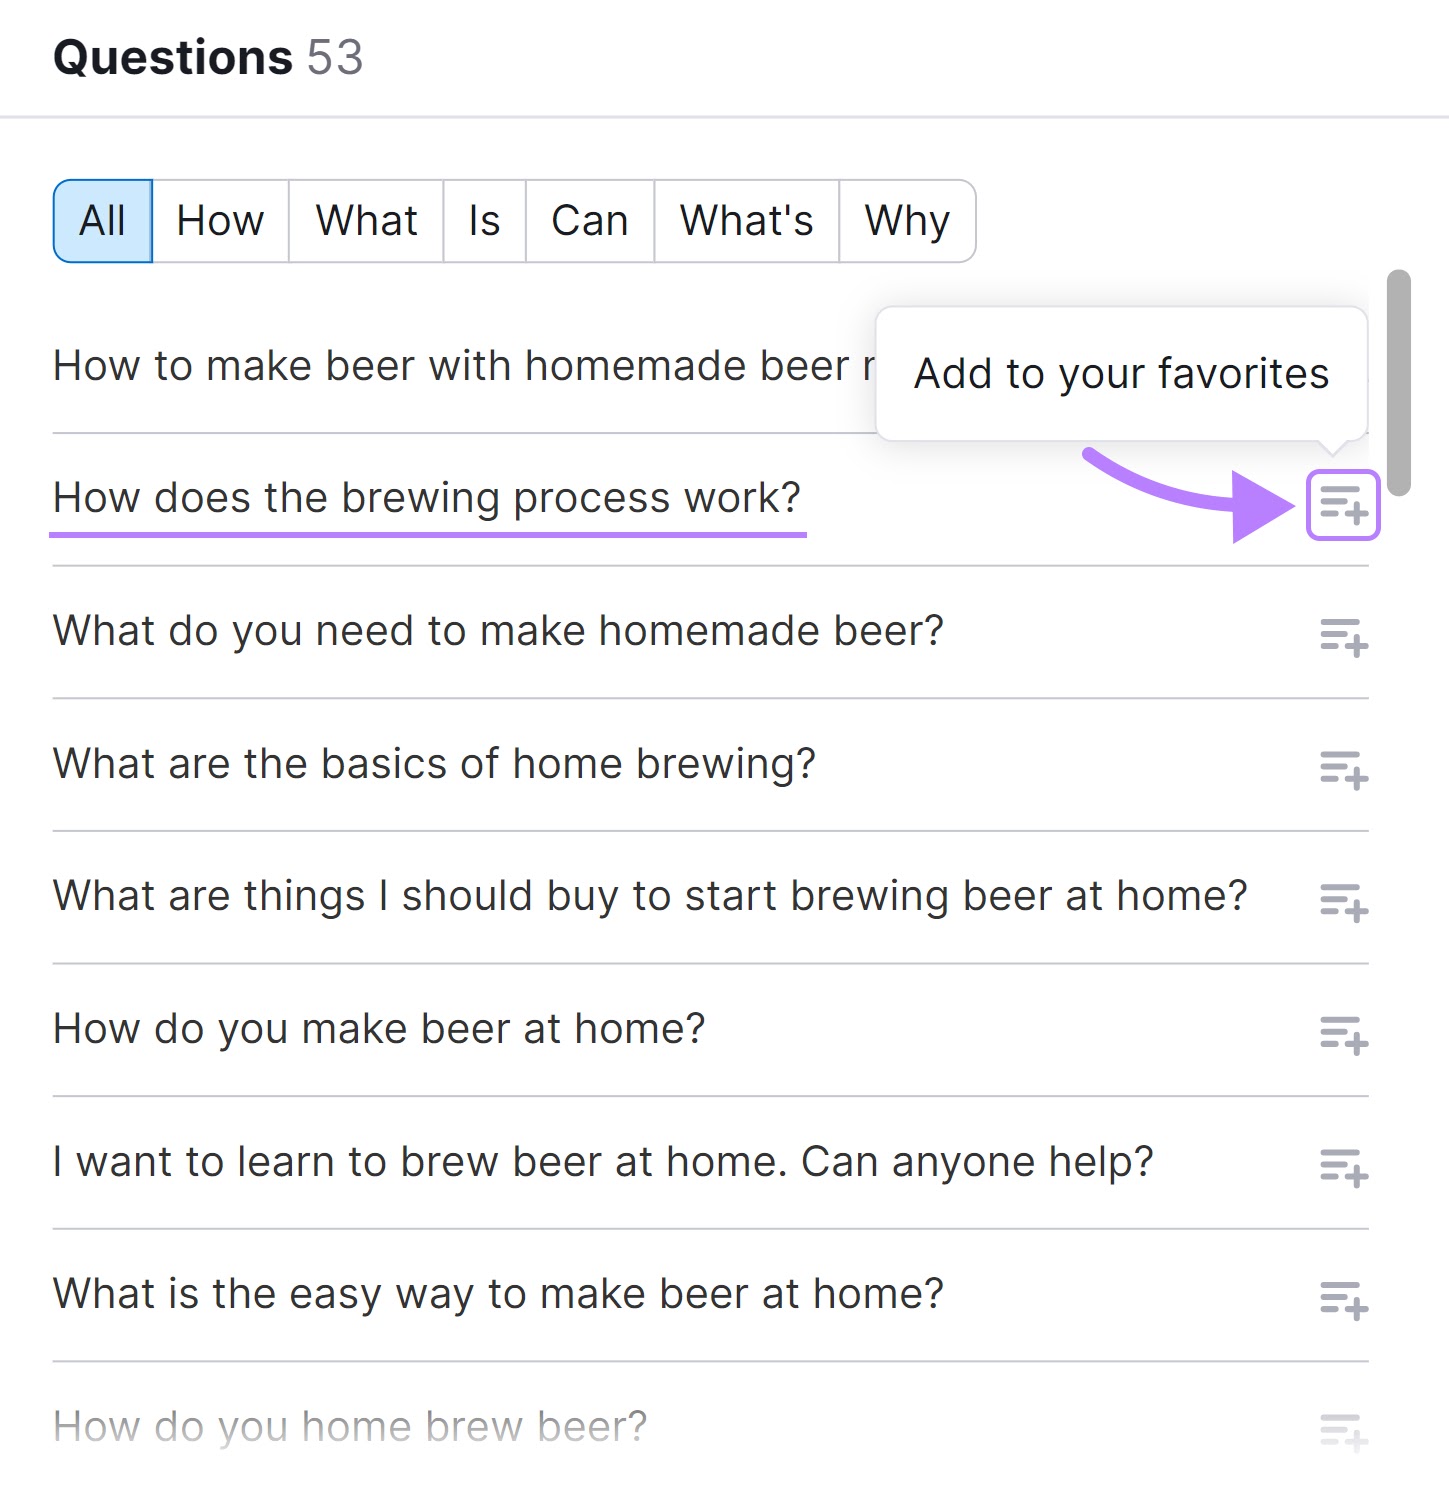 Adding "How does the brewing process   work?" thought  to favorites